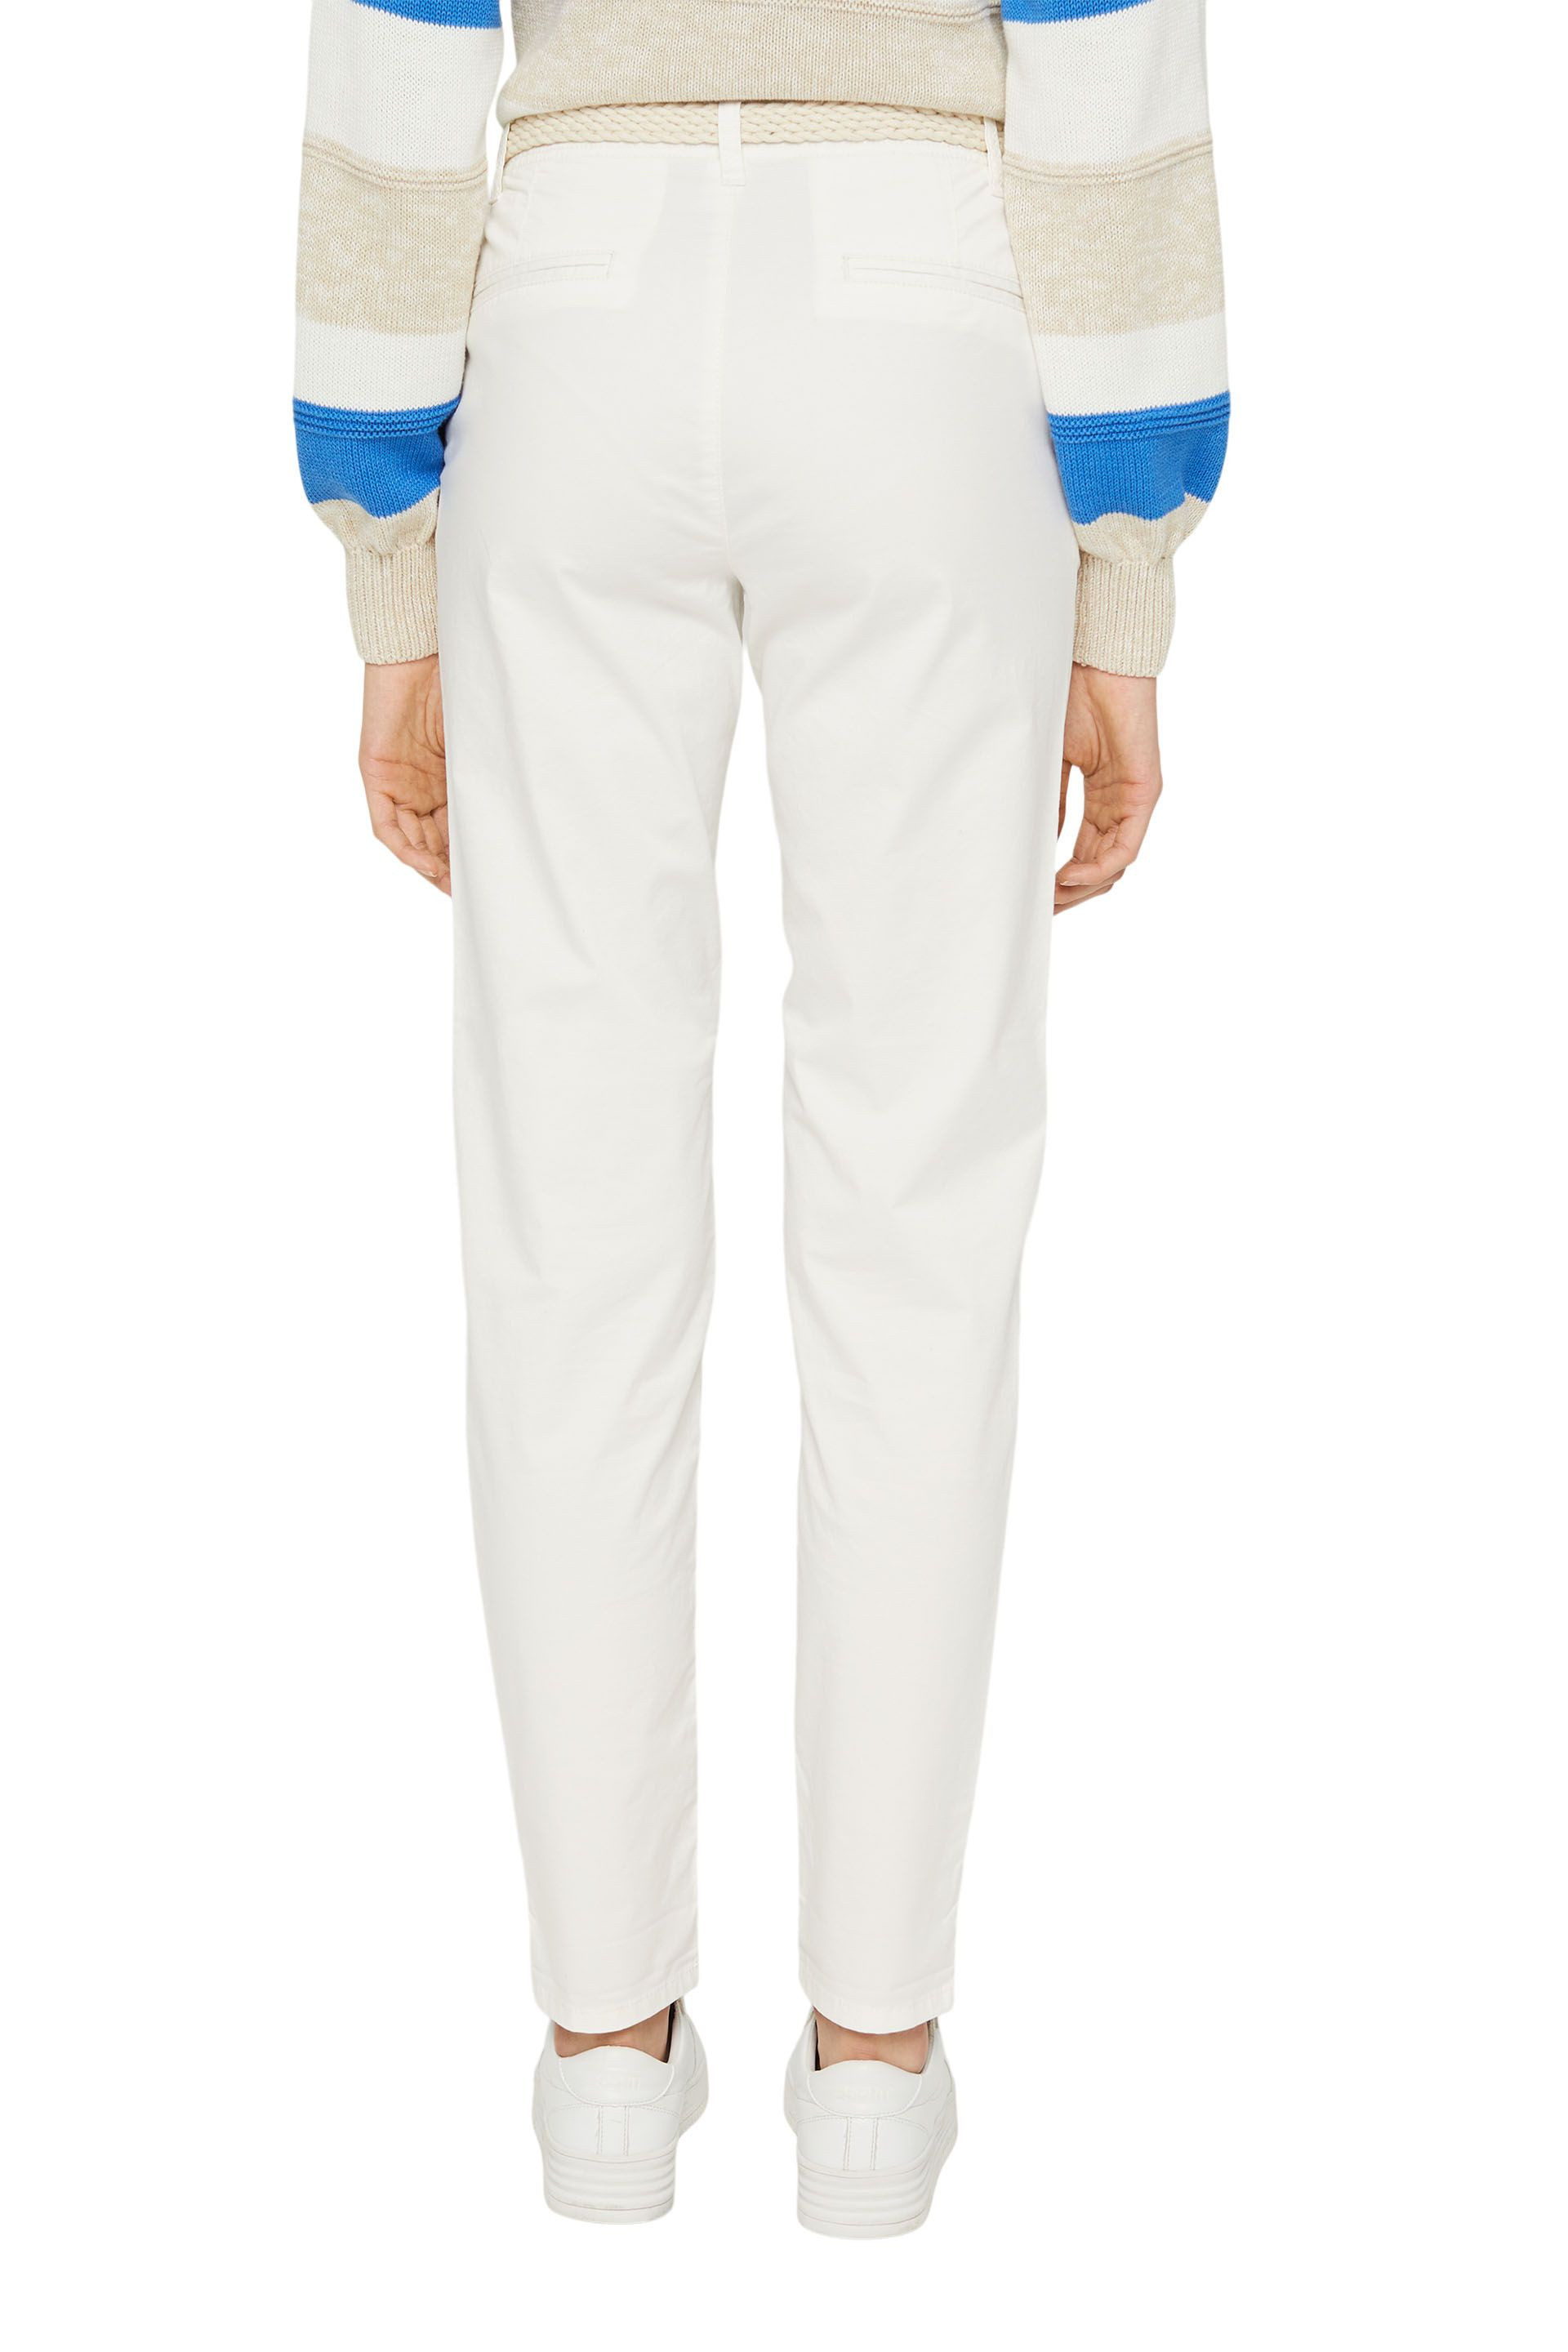 Chino trousers with woven belt, White, large image number 2